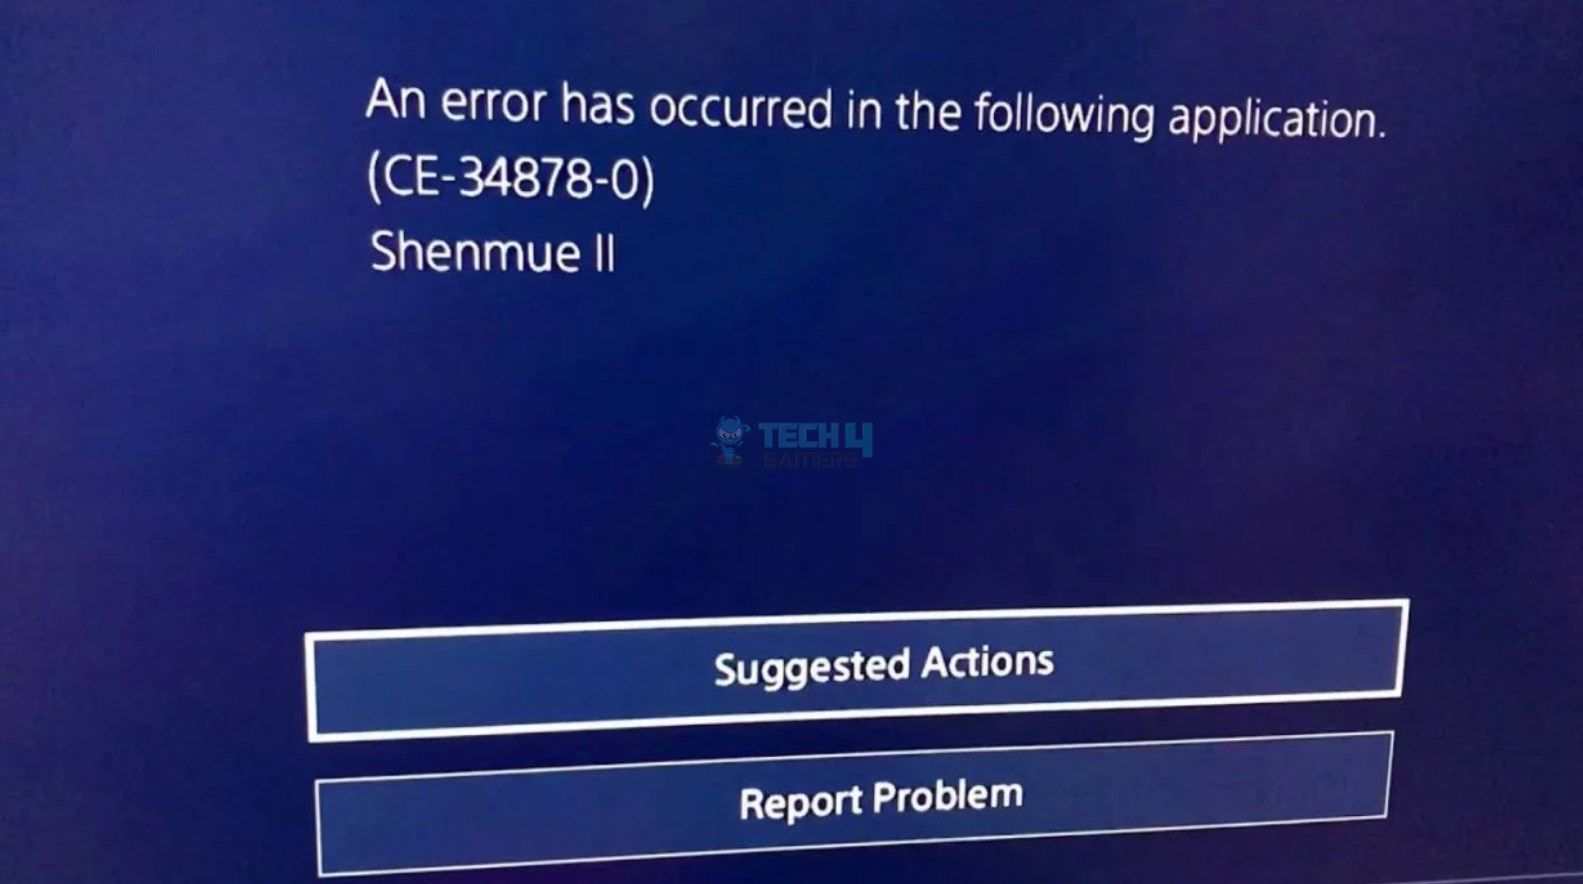 Wait for the process to complete (this may take some time).
Restart the PS4 and check if the error persists.